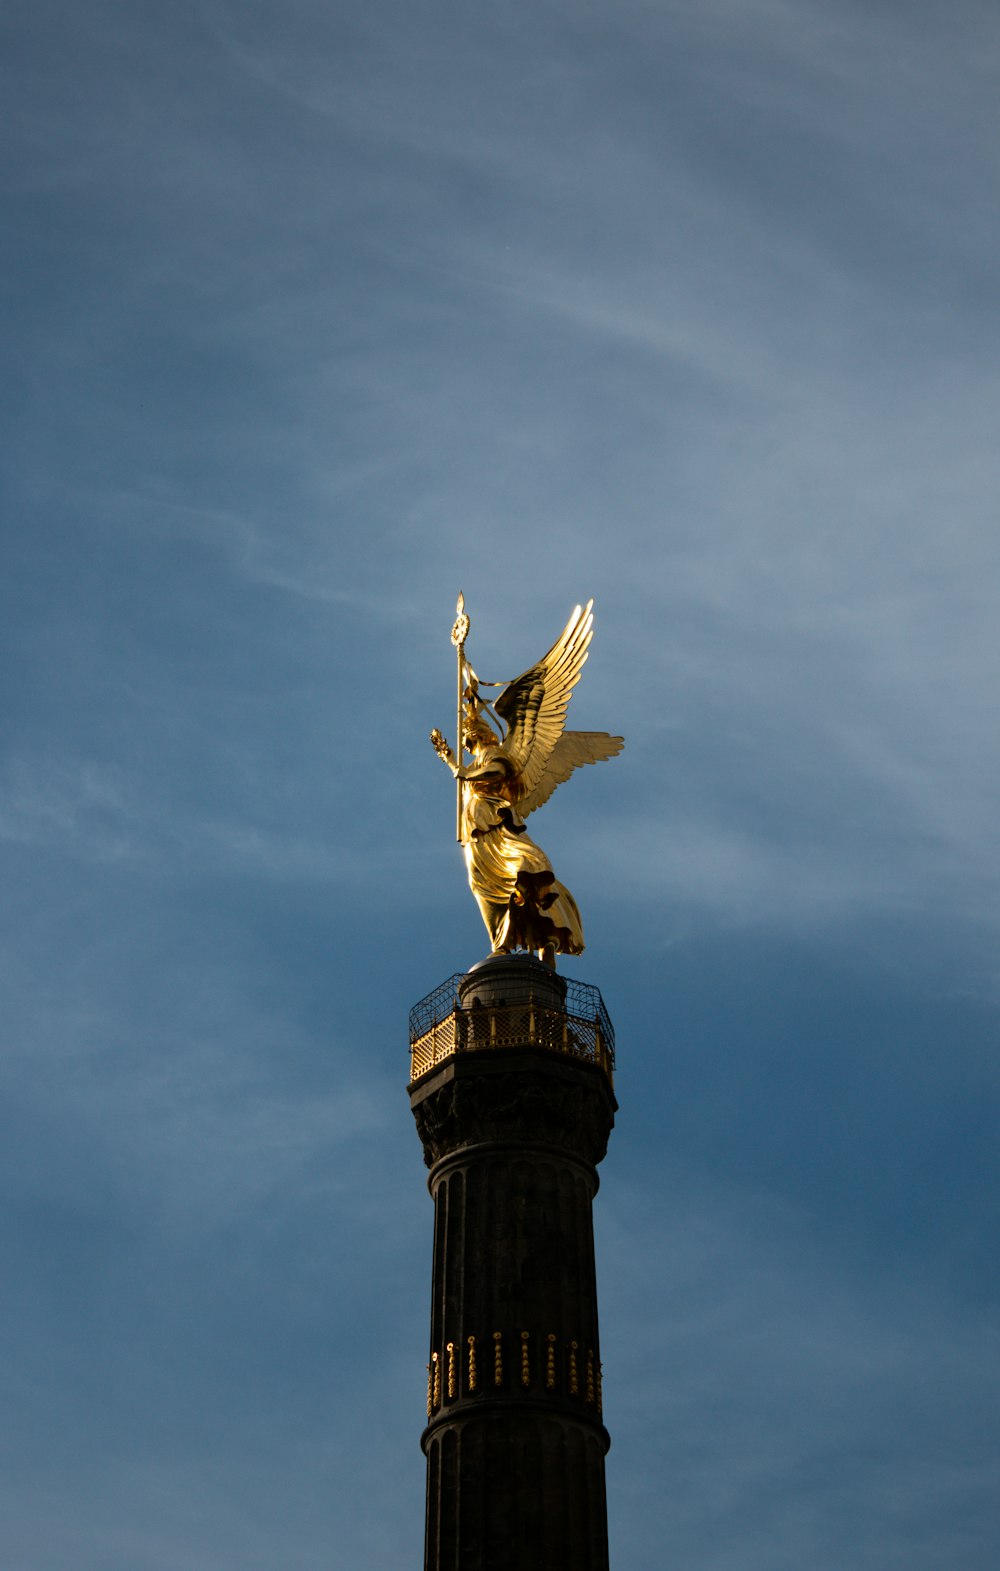 a golden statue on top of a tall tower